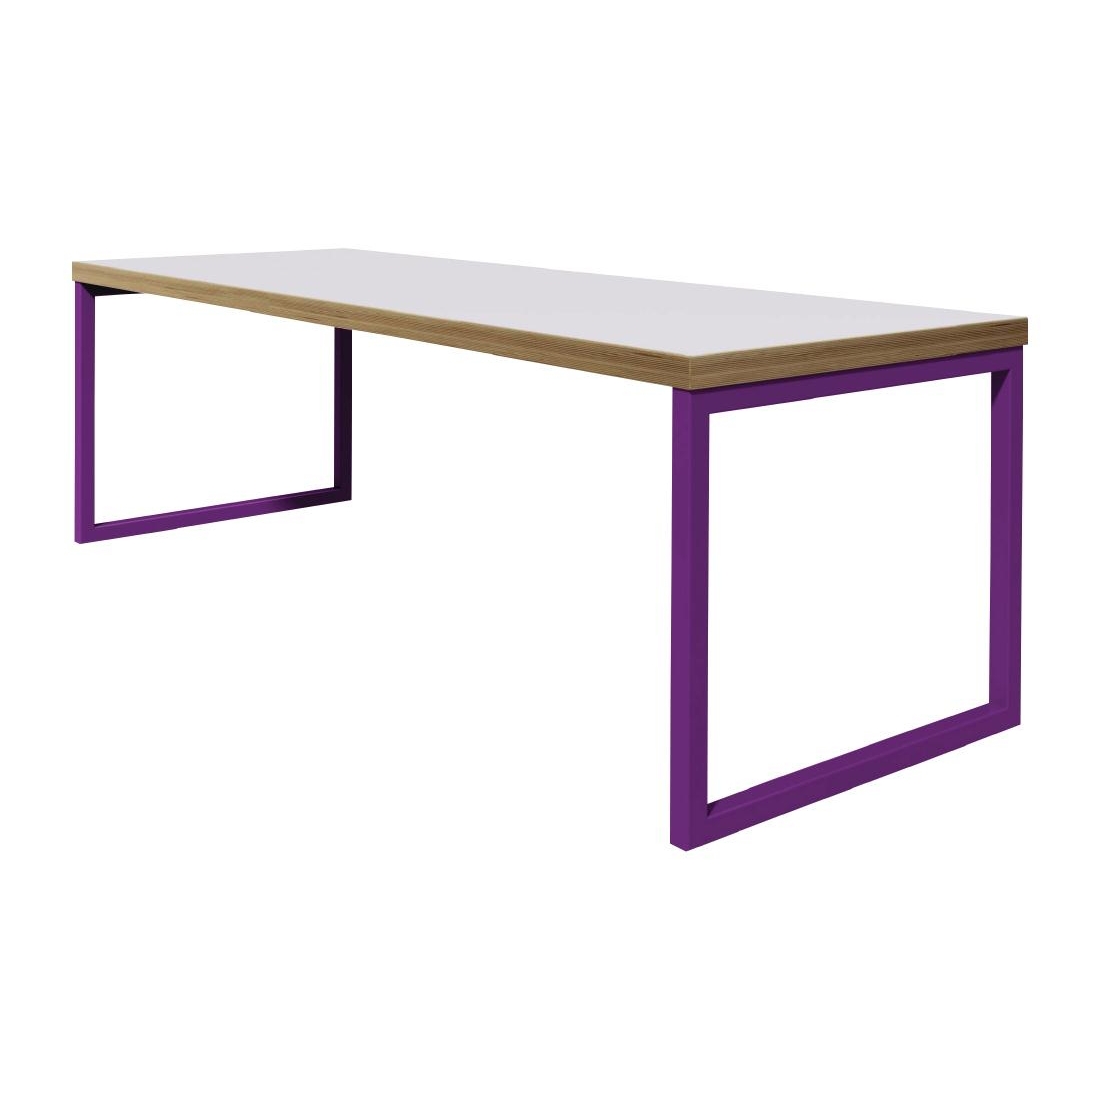 Bolero Dining Table White with Violet Frame 7ft